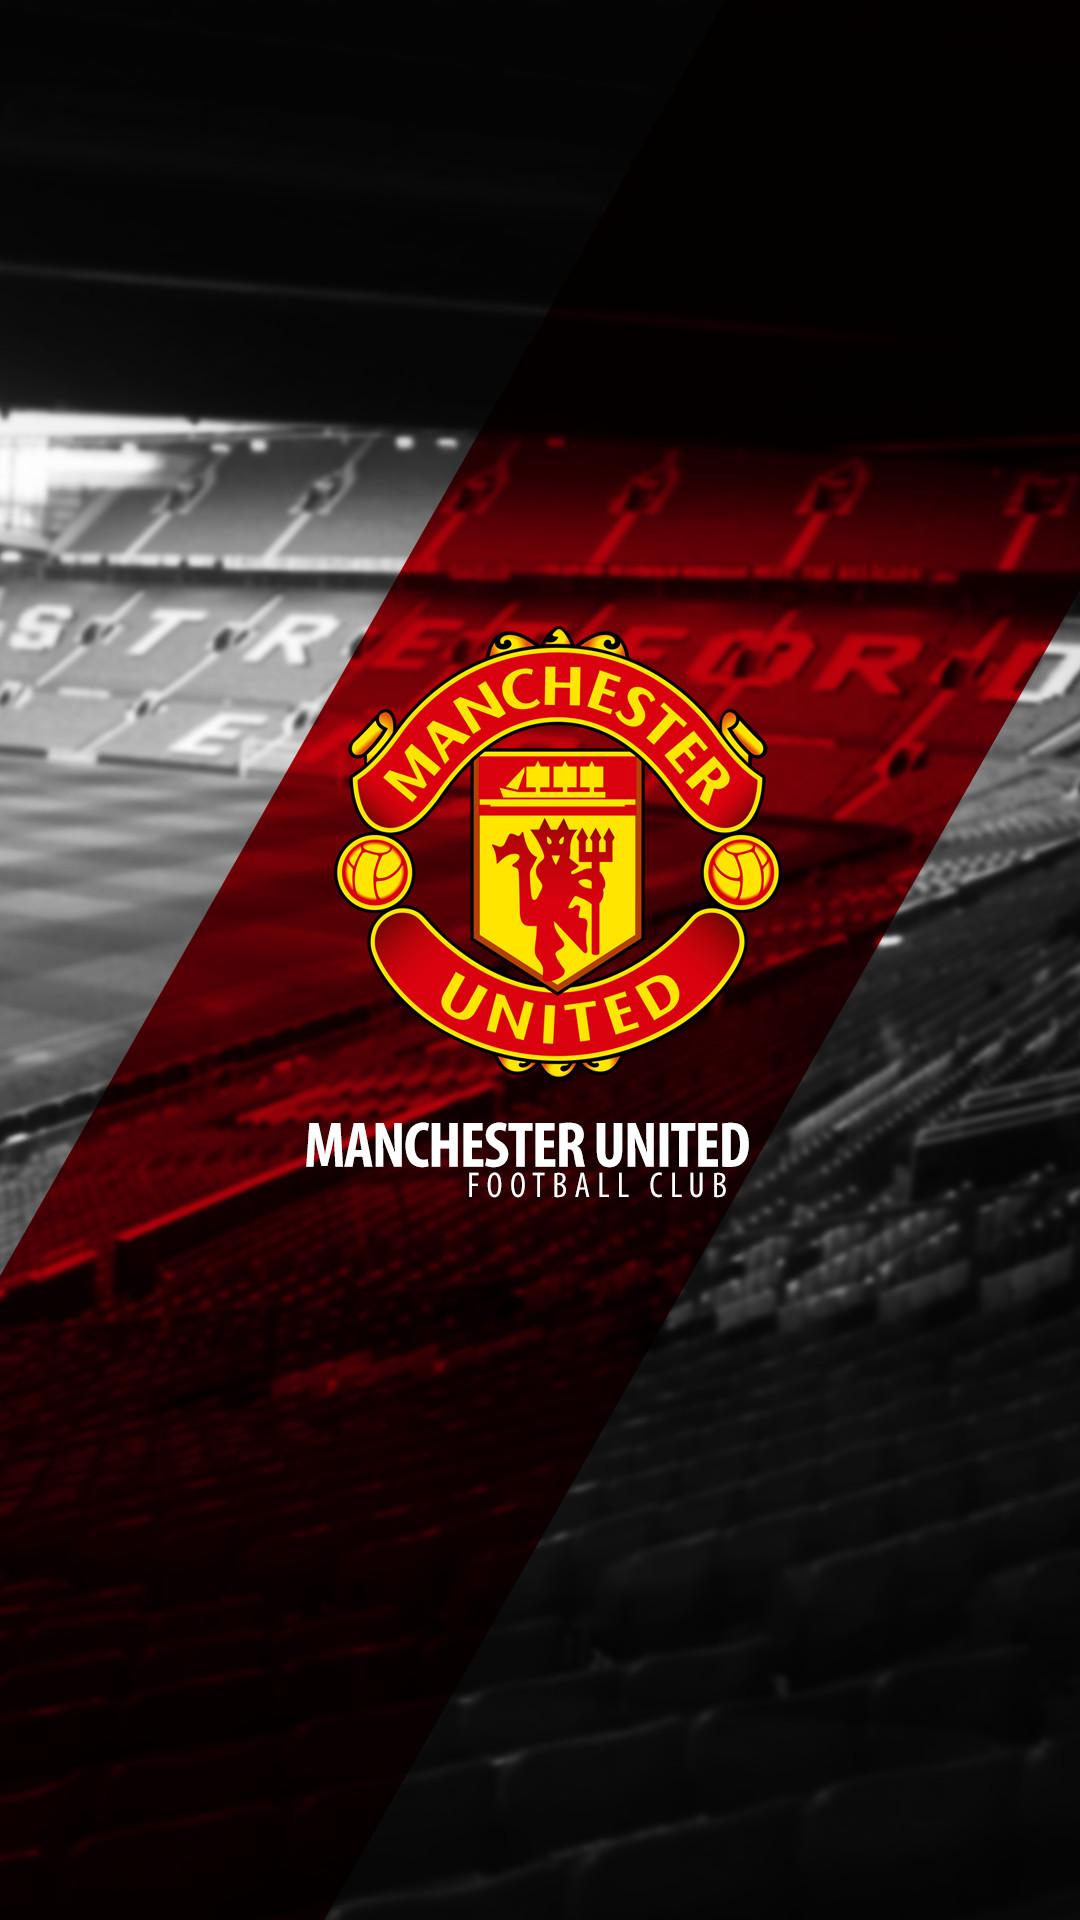 Manchester united wallpaper iphone